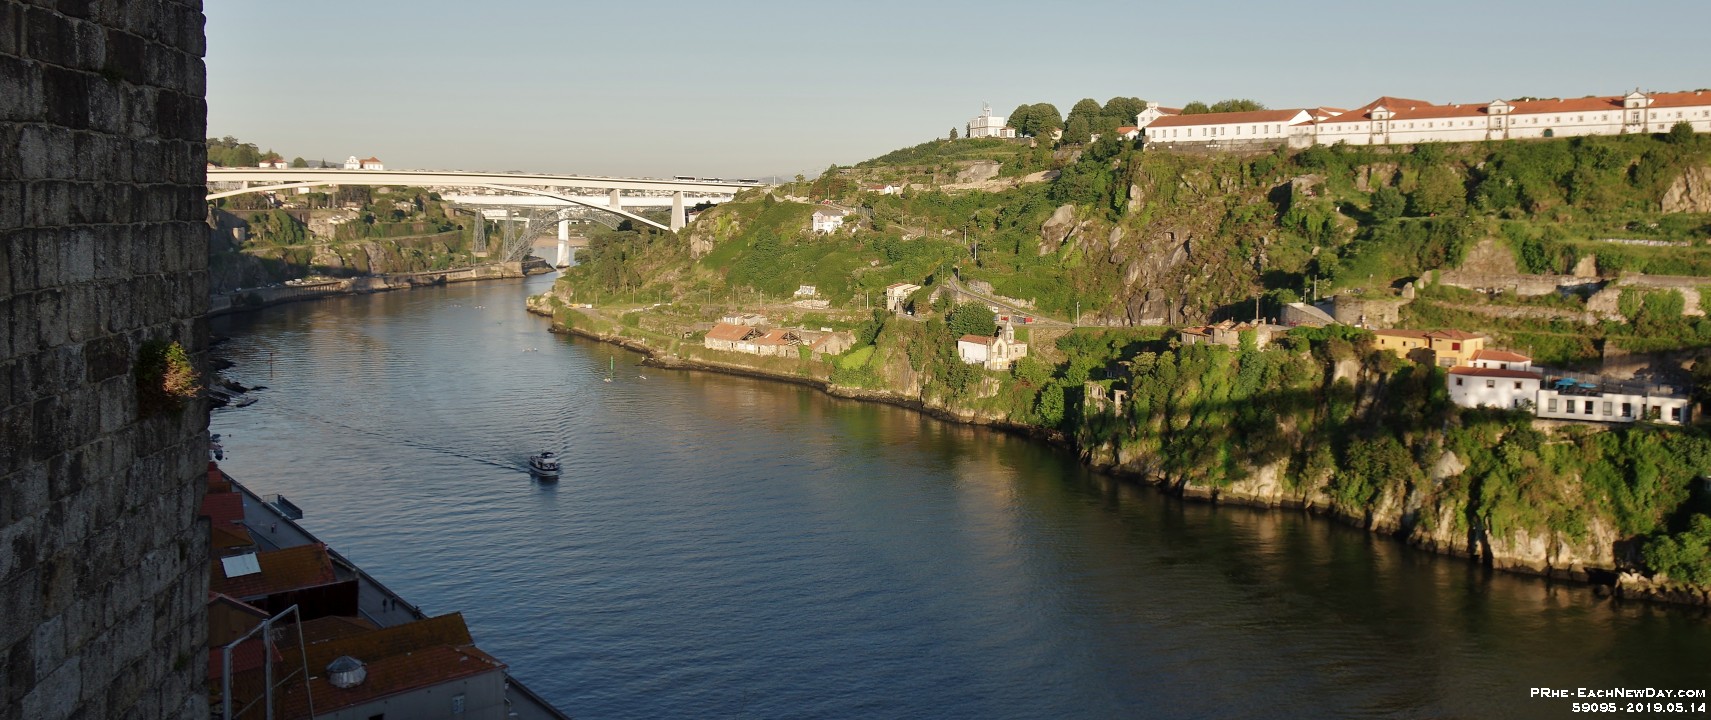 59095CrLeRe - Walking to the Douro River and across the Dom Luis I Bridge with Julia - Porto, Portugal